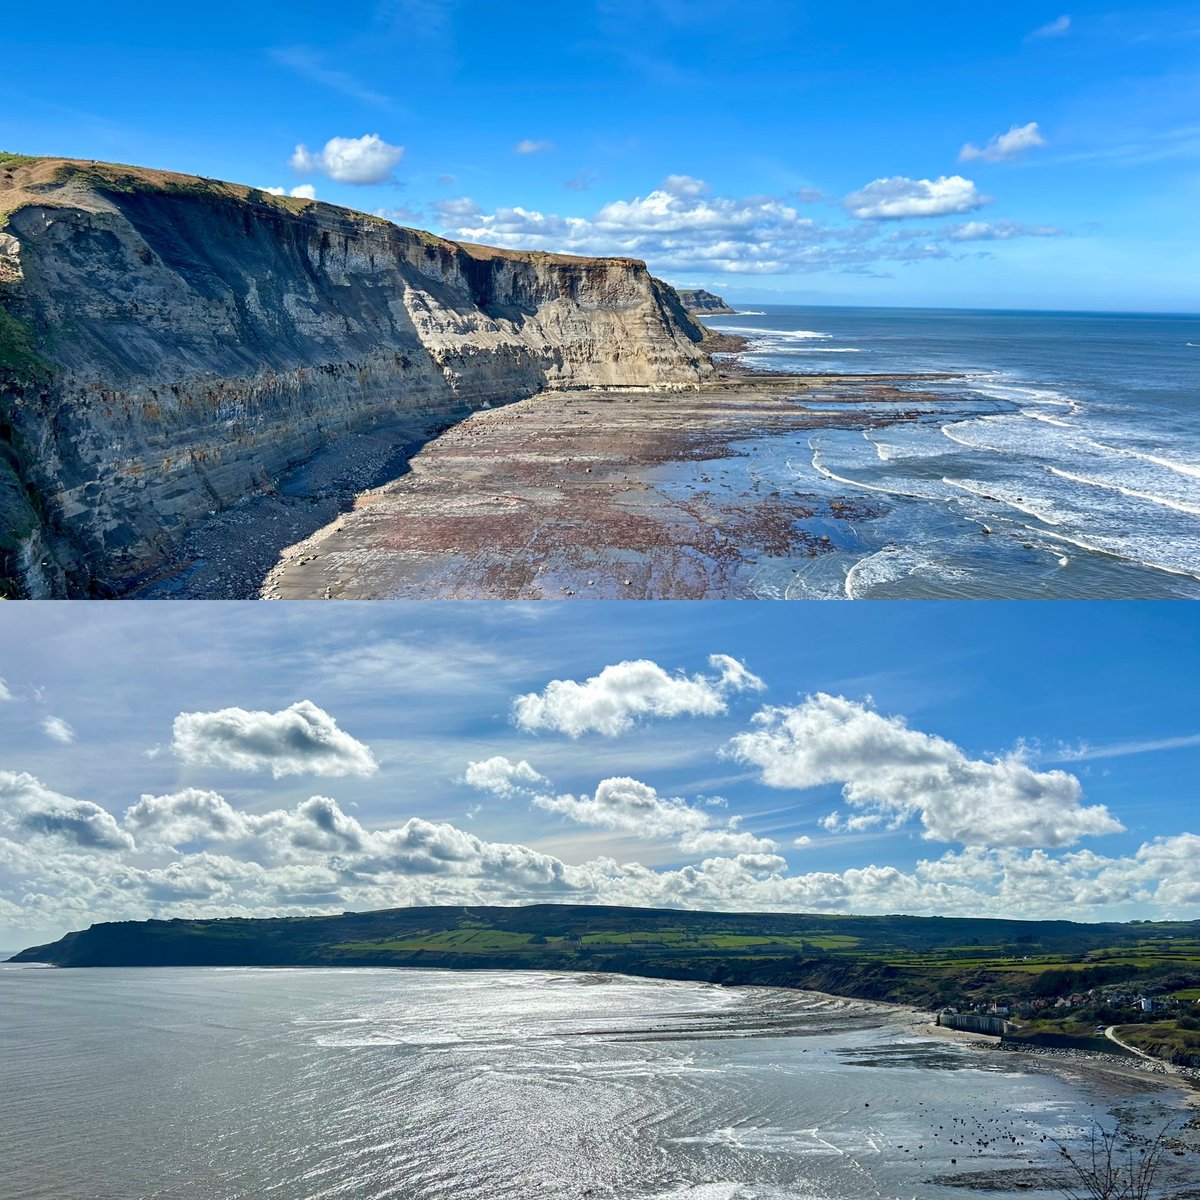 Robin Hood’s Bay towards Ravenscar (the sea wall of which always makes me think of Helms Deep) and Bay Ness Cliffs looking towards Whitby.